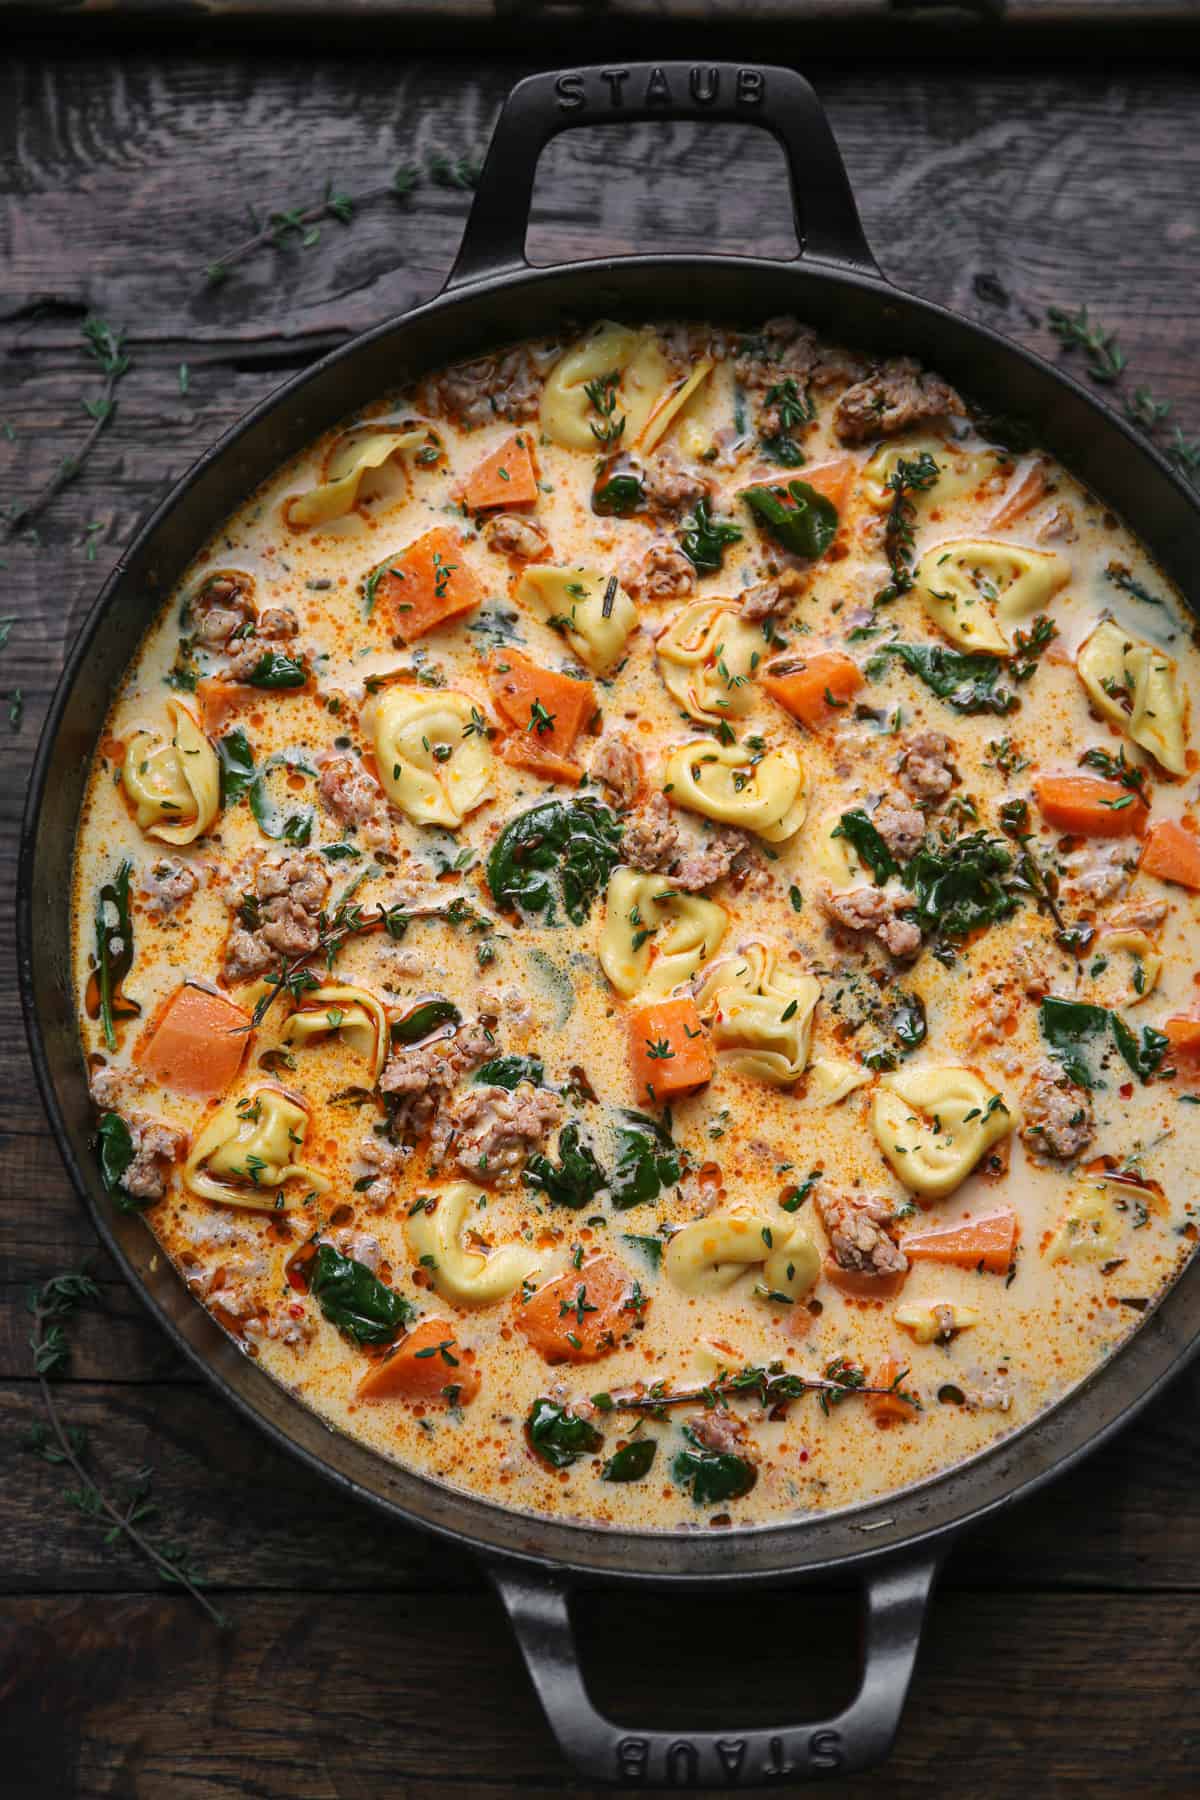 sausage tortellini soup with sweet potatoes and spinach in a cast iron pan